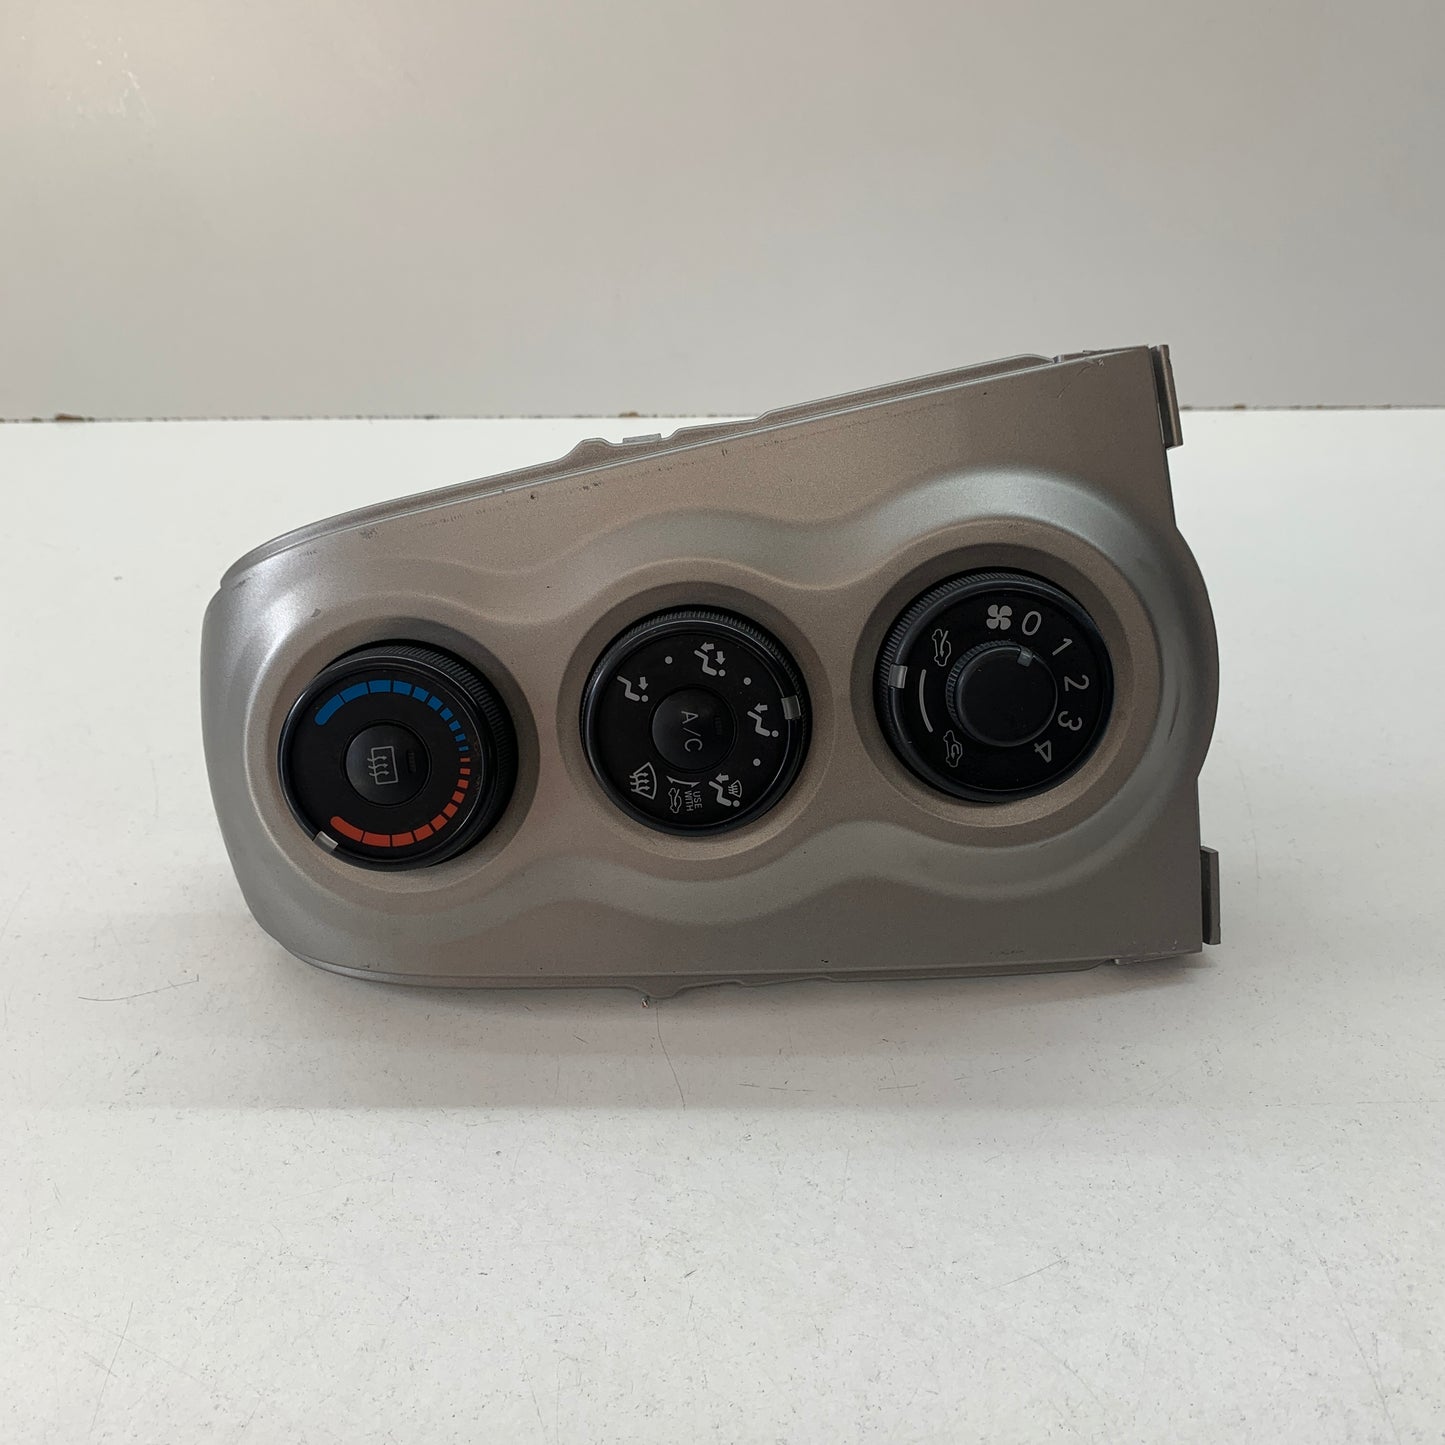 Toyota Yaris Hatchback Air Conditioning Controls 2005 2006 2007 2008 2009 2010